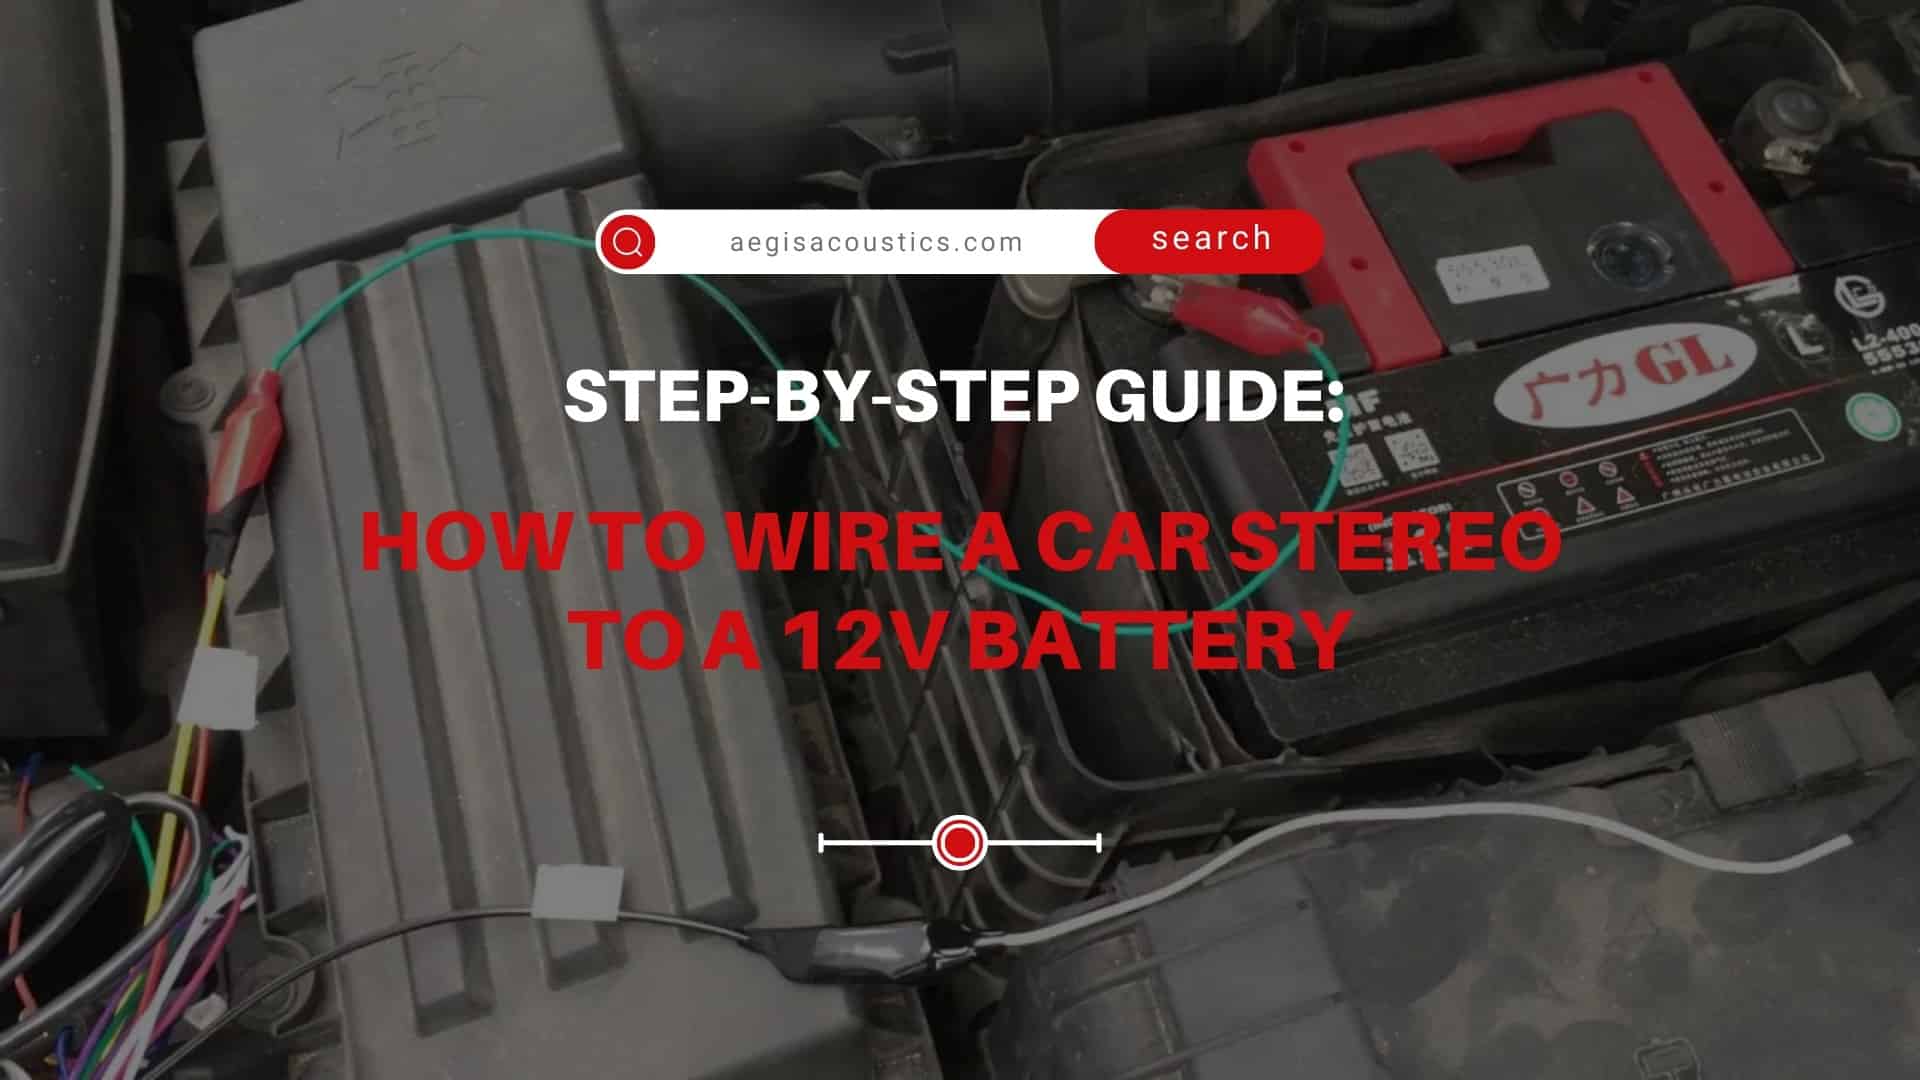 Step-by-step guide: How to wire a car stereo to a 12v battery.